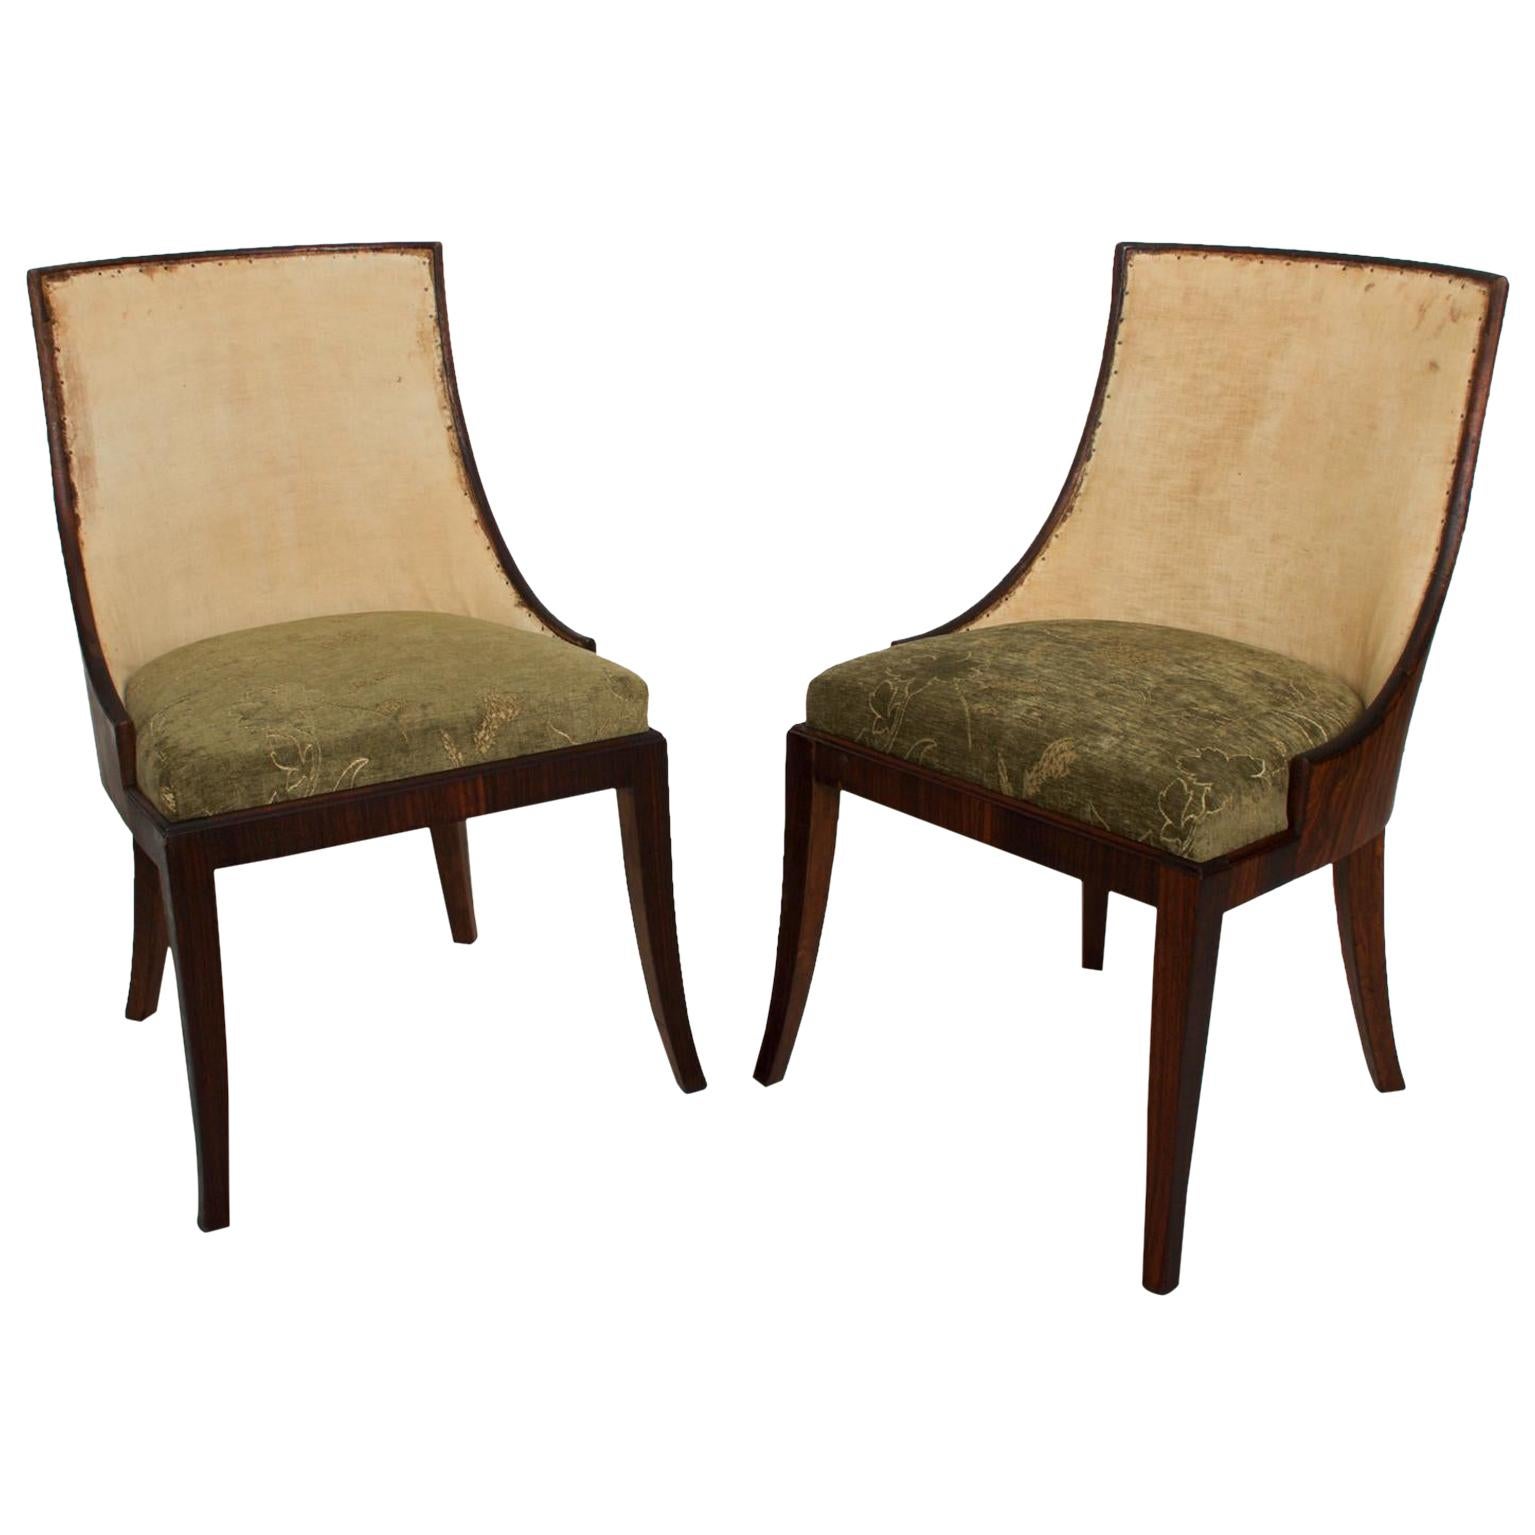 1940s Exquisite Pair of French Art Deco Rosewood Barrel Side Chairs 
In the style of Gilbert Rohde.
35 H x 24 D x 20.5 W Seat 19.5
No label.
Original Vintage Preowned unrestored condition.
Please see the images provided.
Delivery available to LA